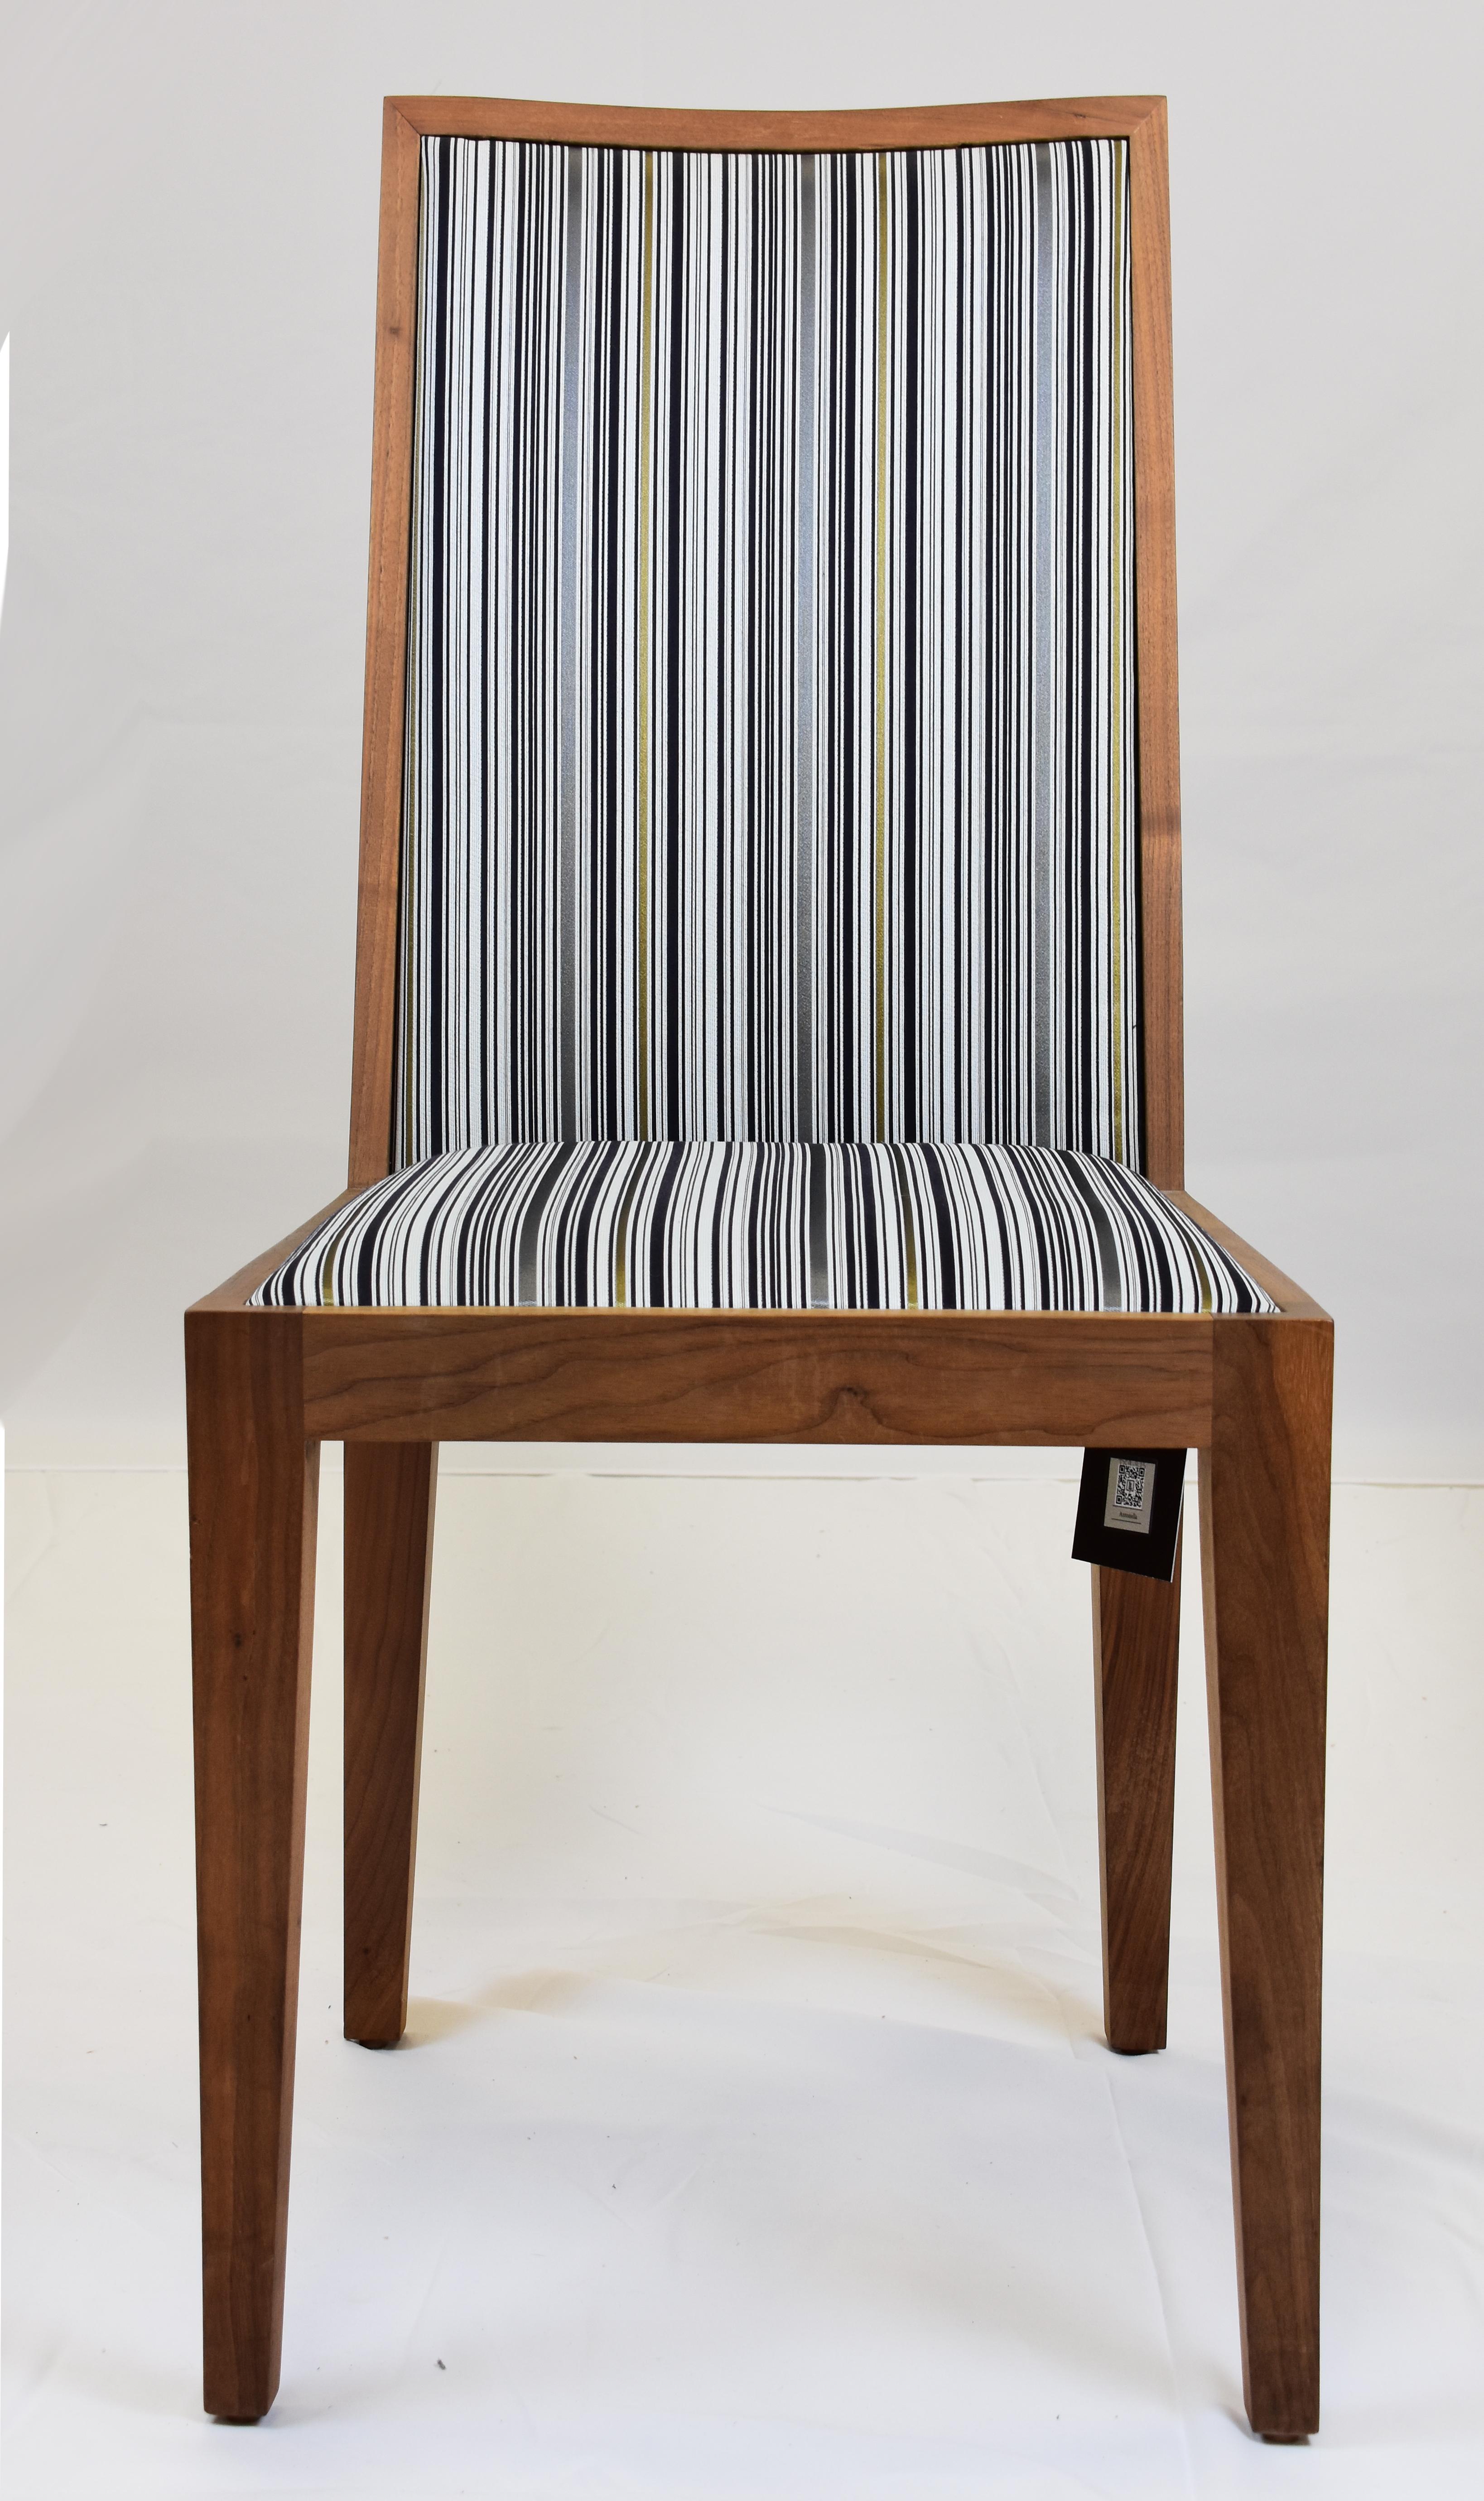 Le Jeune Upholstery Antonella Walnut Dining Chair Showroom Model

Offered for sale is a showroom model armless dining chair by Le Jeune Upholstery with grey and blue striped blend upholstery. The chair may have minor marks on the wood as it is a